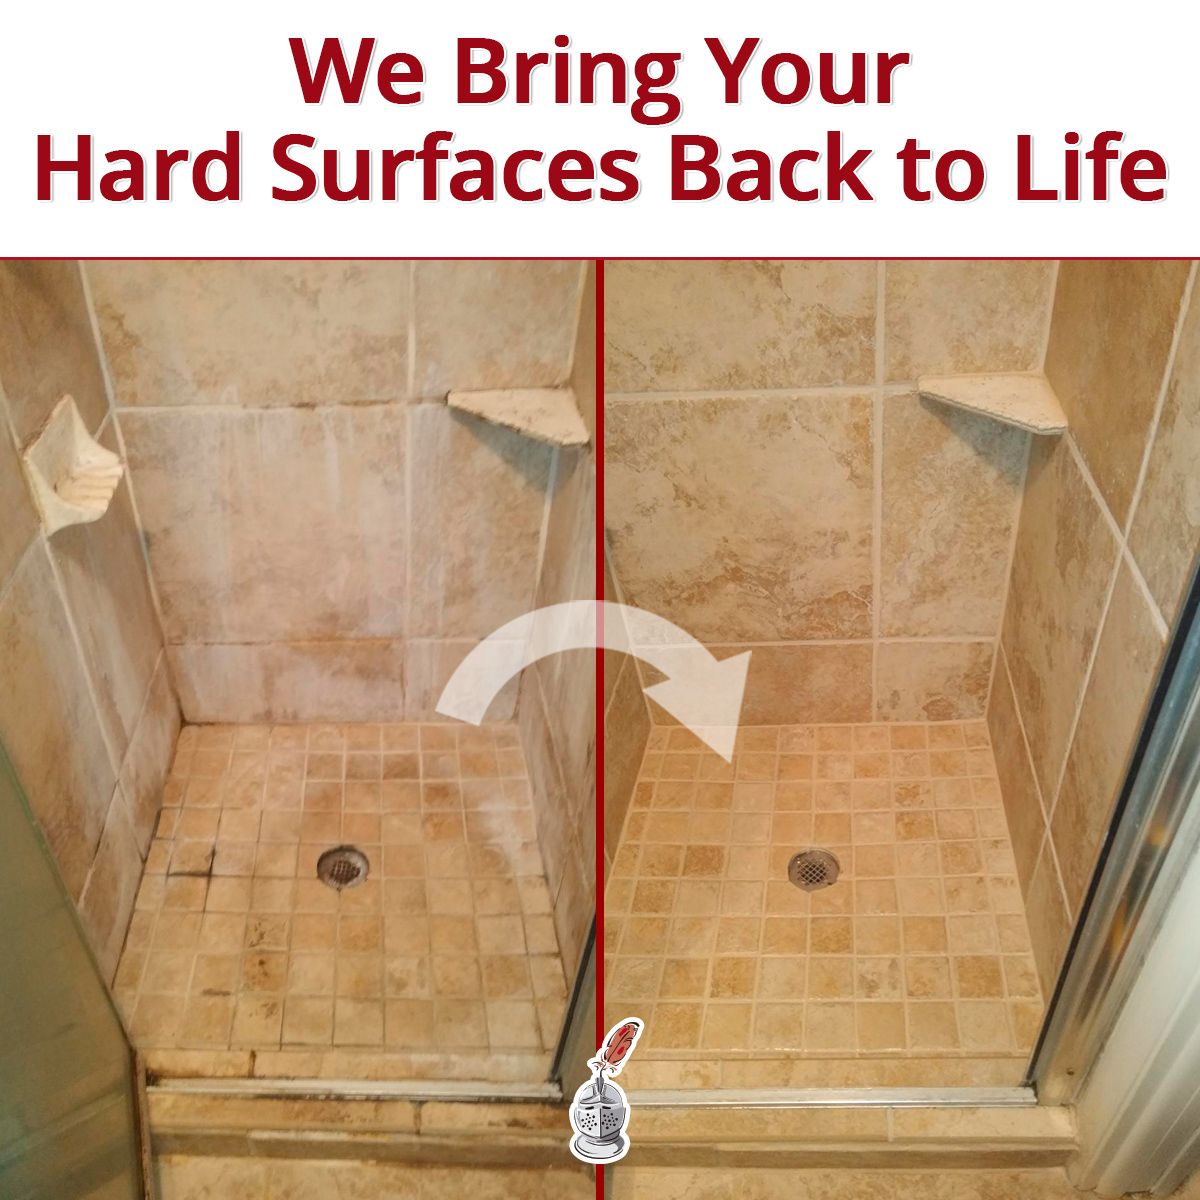 We Bring Your Hard Surfaces Back to Life